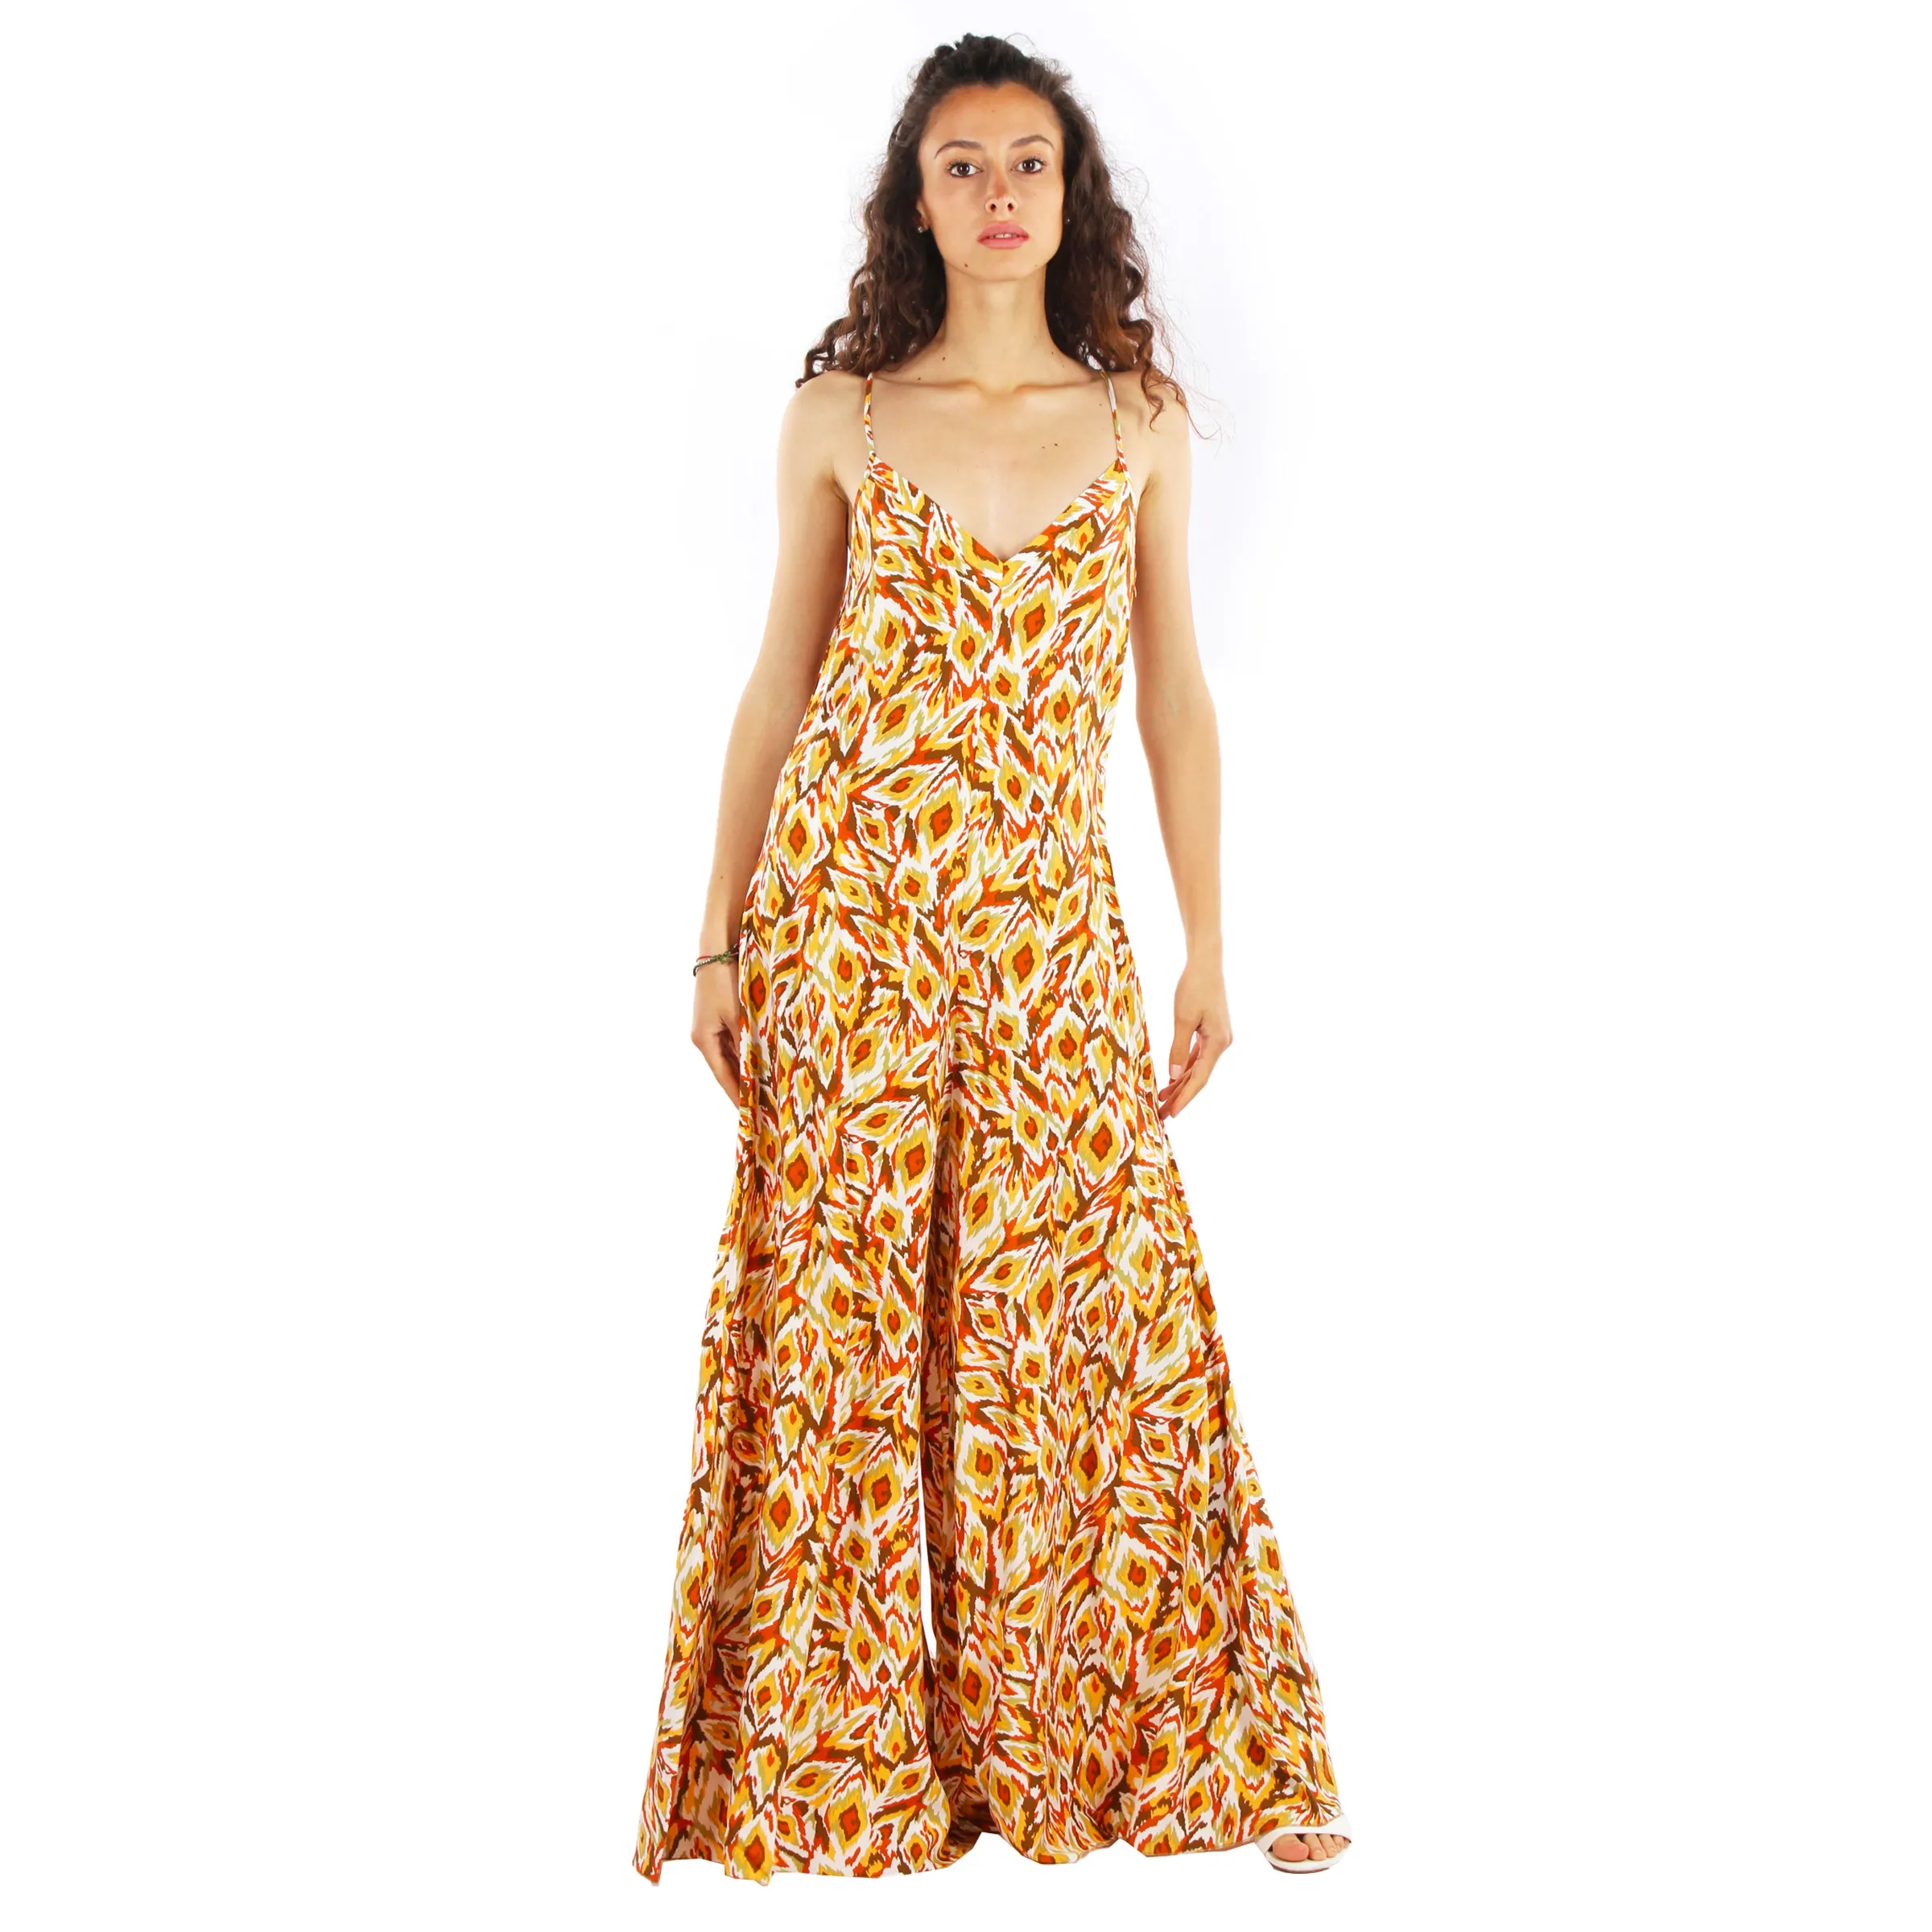 Festive Summer Fantasy: Sleeveless Yellow Print Overall Perfect for a Stylish and Playful Look size large